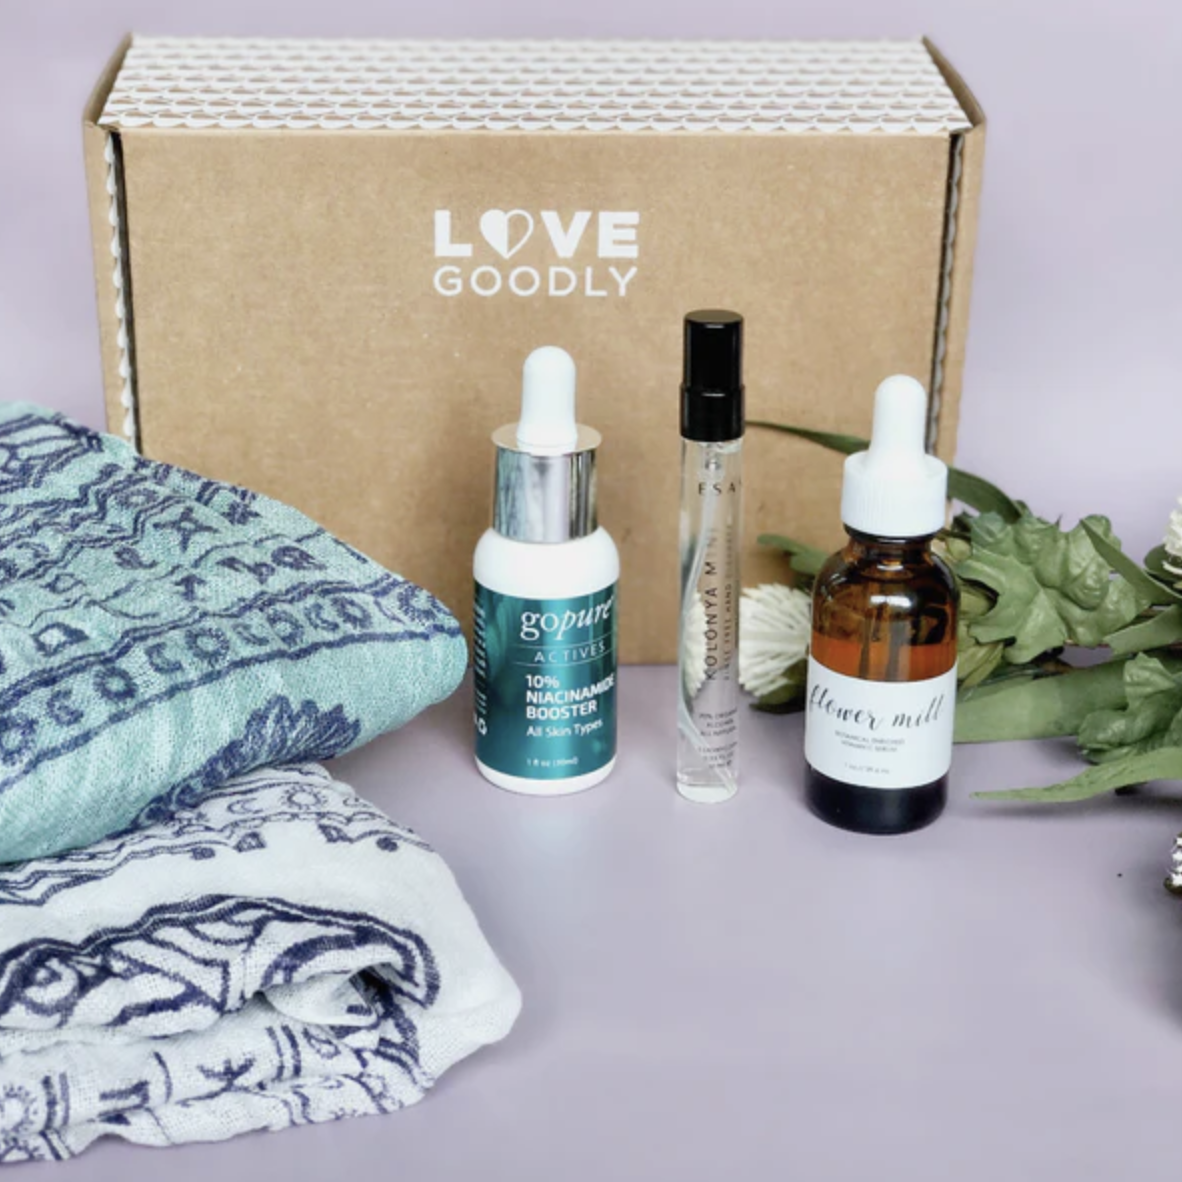 A variety of products next to a Love Goodly box